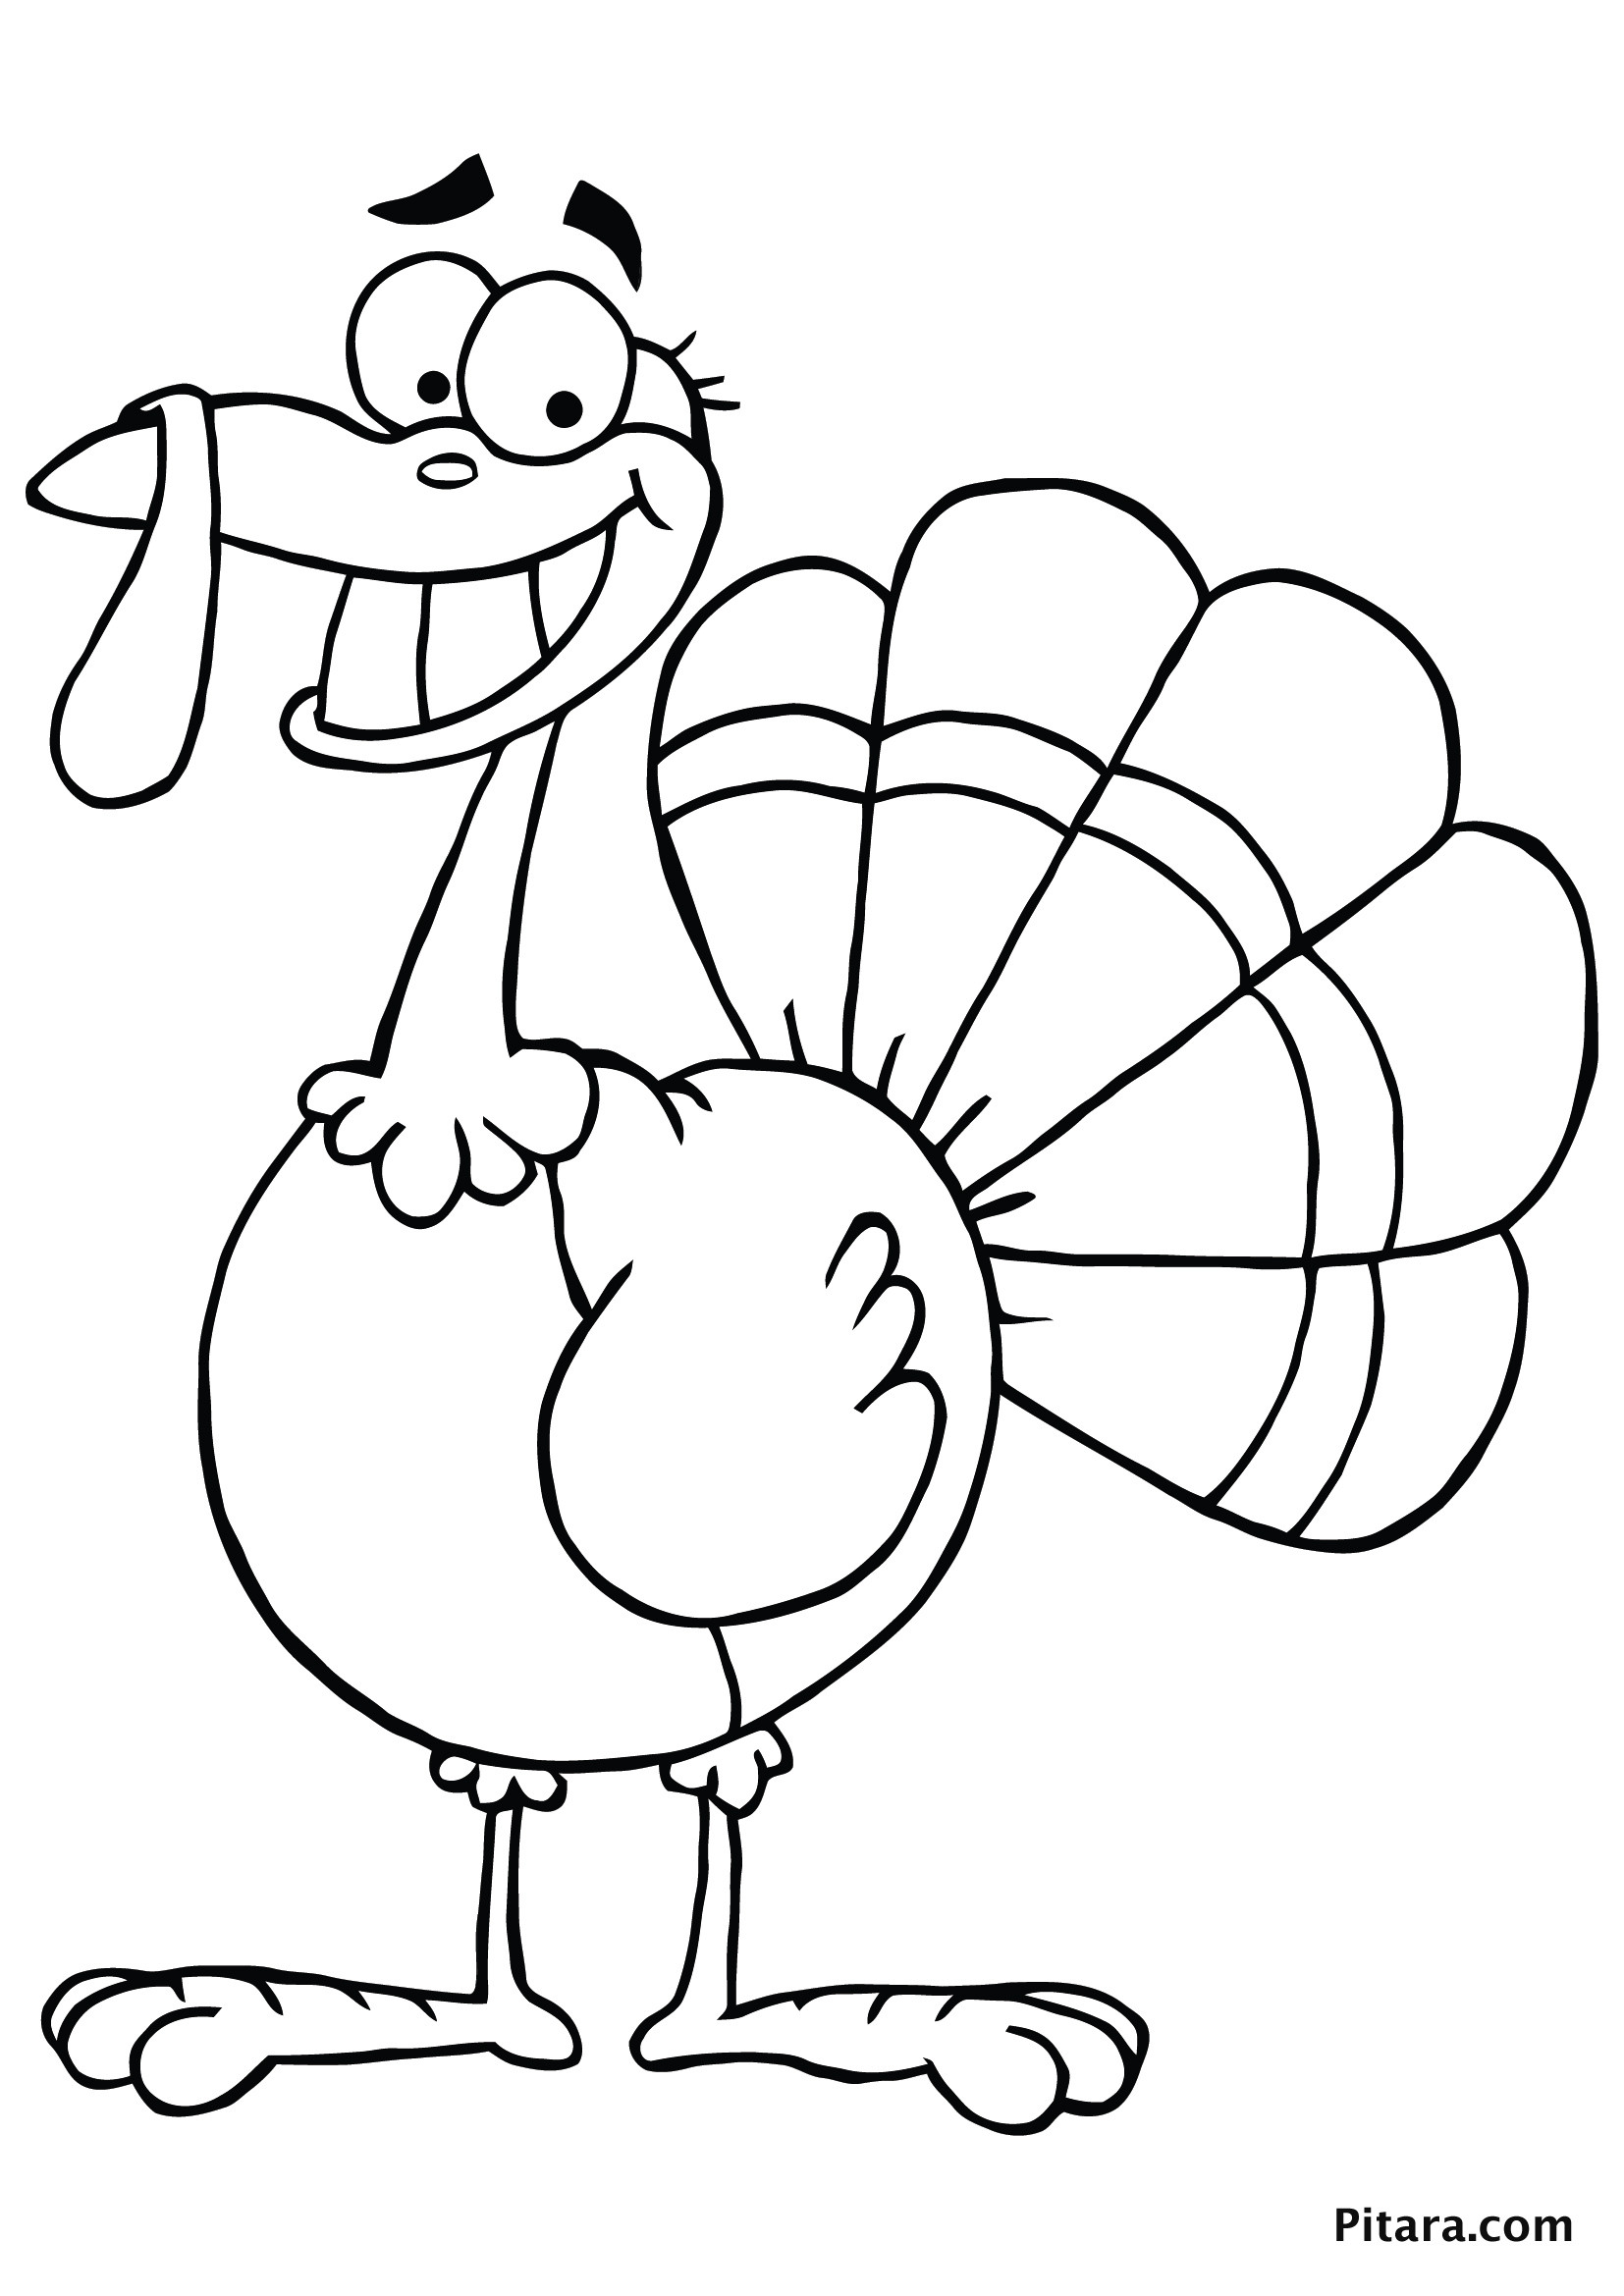 Coloring Pages Turkey
 Turkey Coloring Pages for Kids